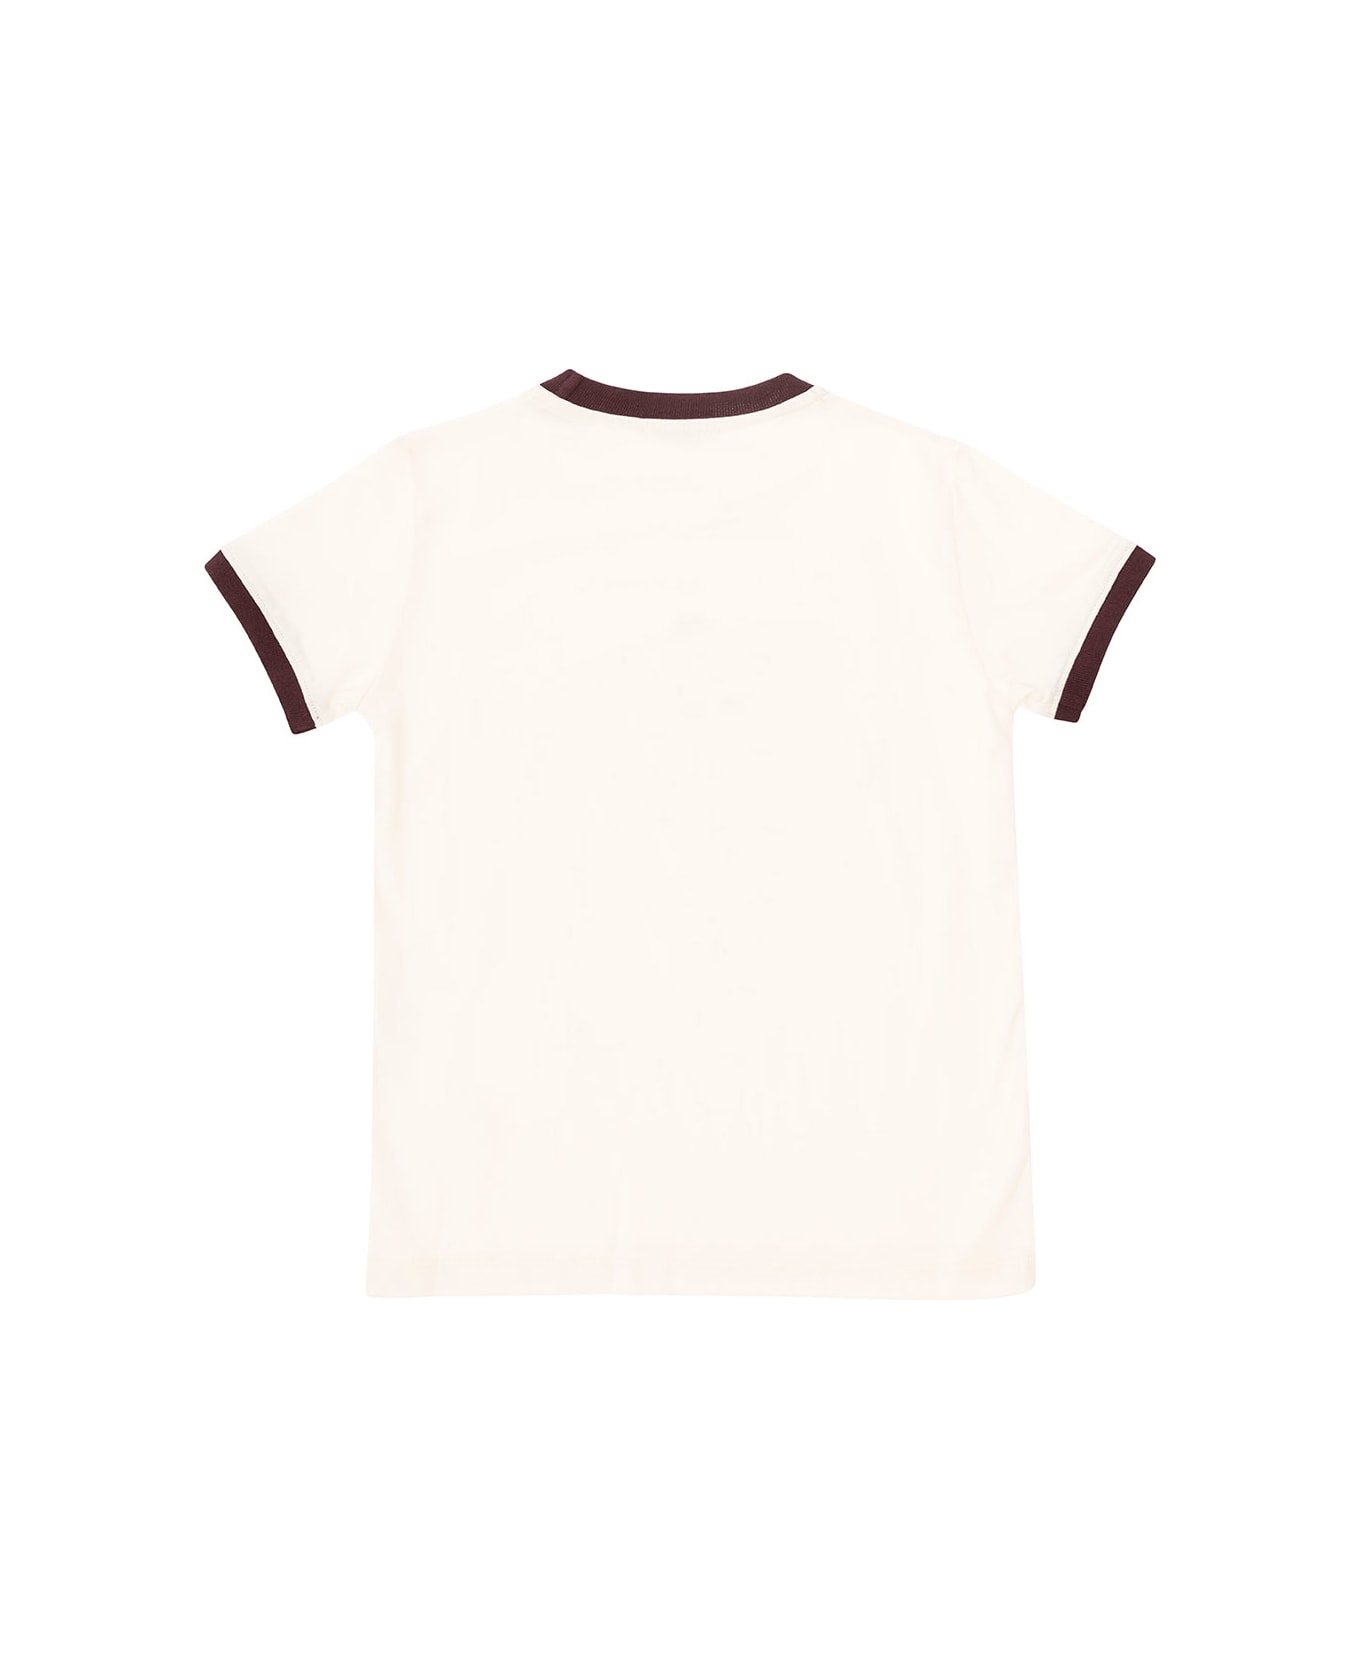 Golden Goose Journey/ Boy's T-shirt Sleeve Ribs/ Cotton Jersey Printed Include Il Codice Gyp01625 | P001299 -82455 - Multicolor